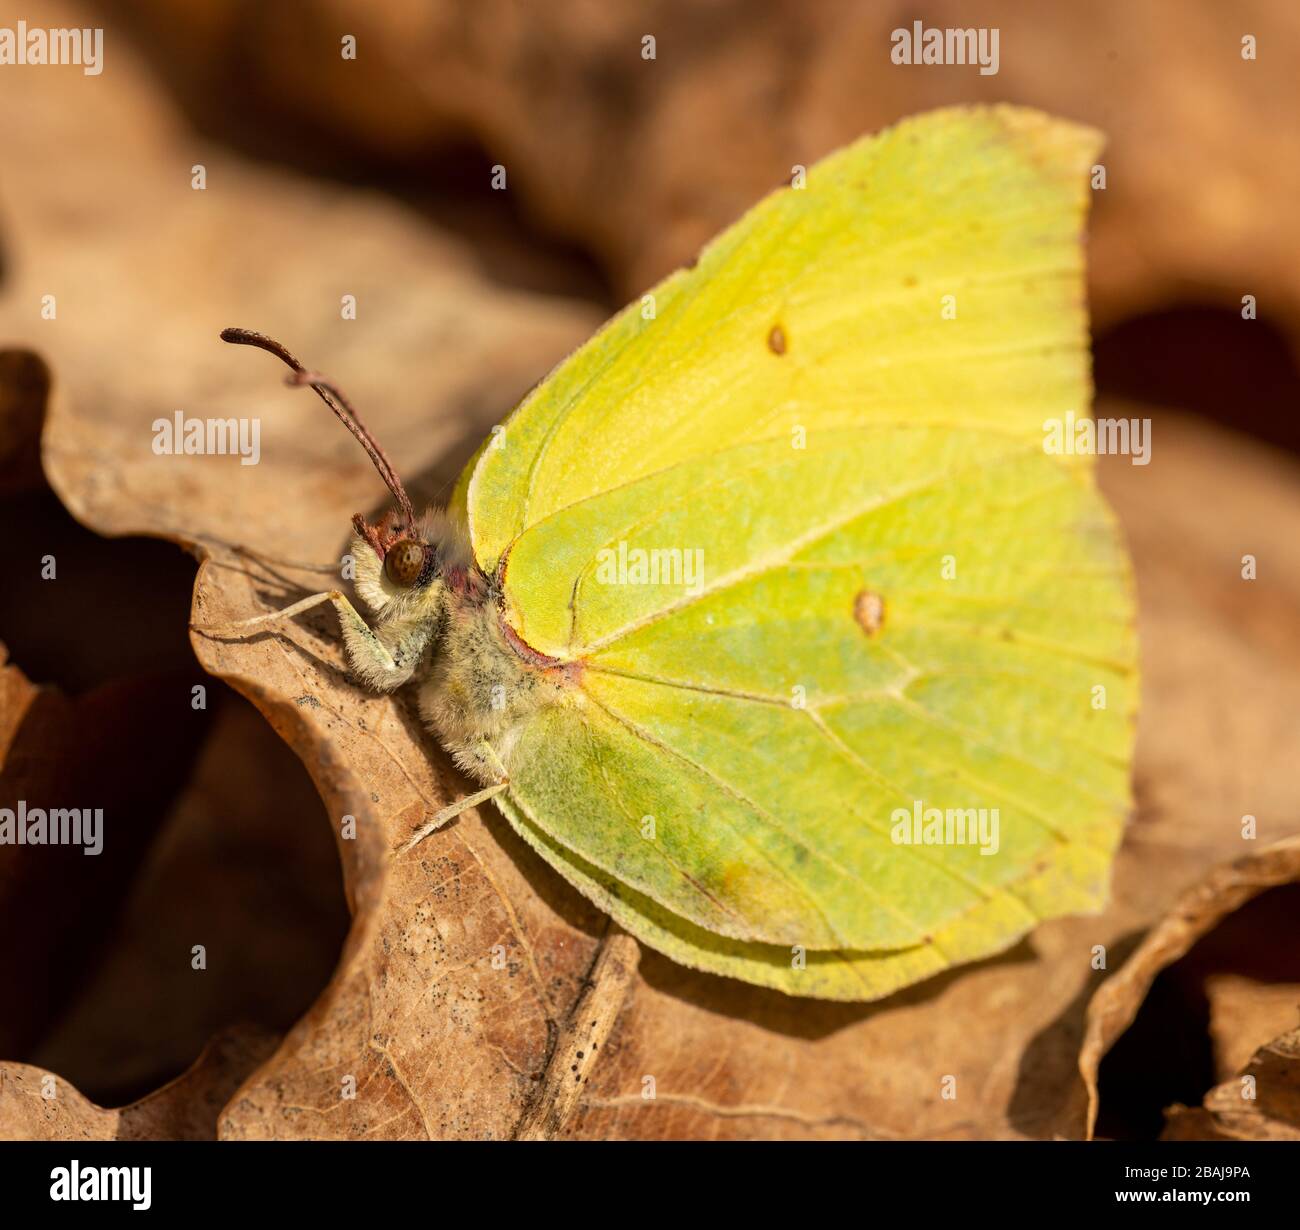 detail of yellow butterfly common brimstone (Gonepteryx rhamni) sitting on dry leaf, animal insect macro Stock Photo